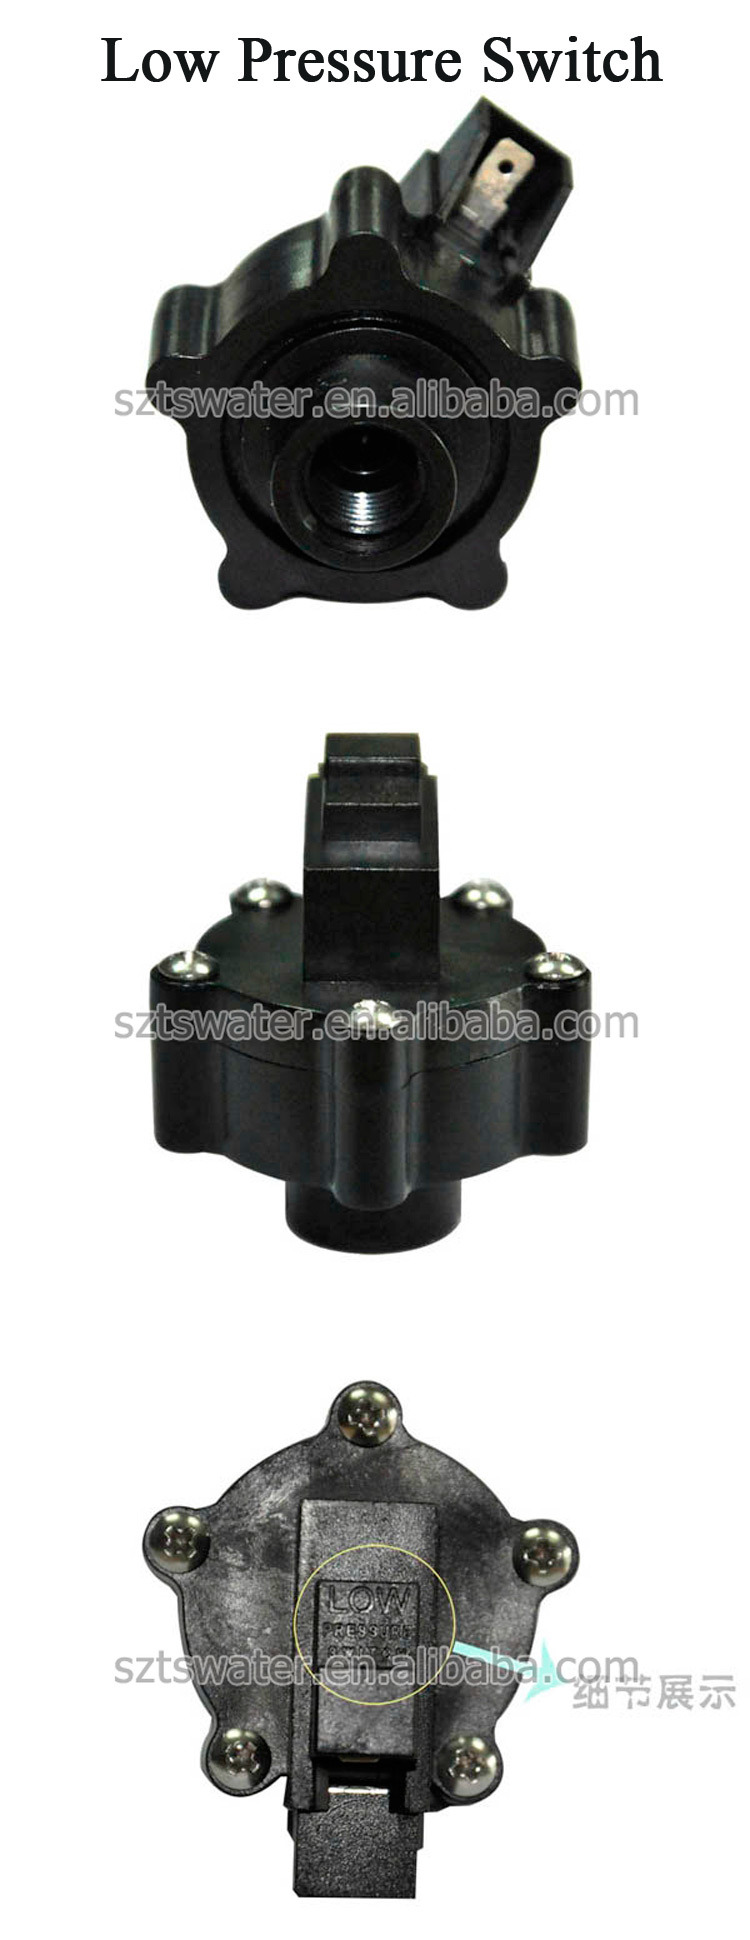 Low Pressure Switch for RO Water System